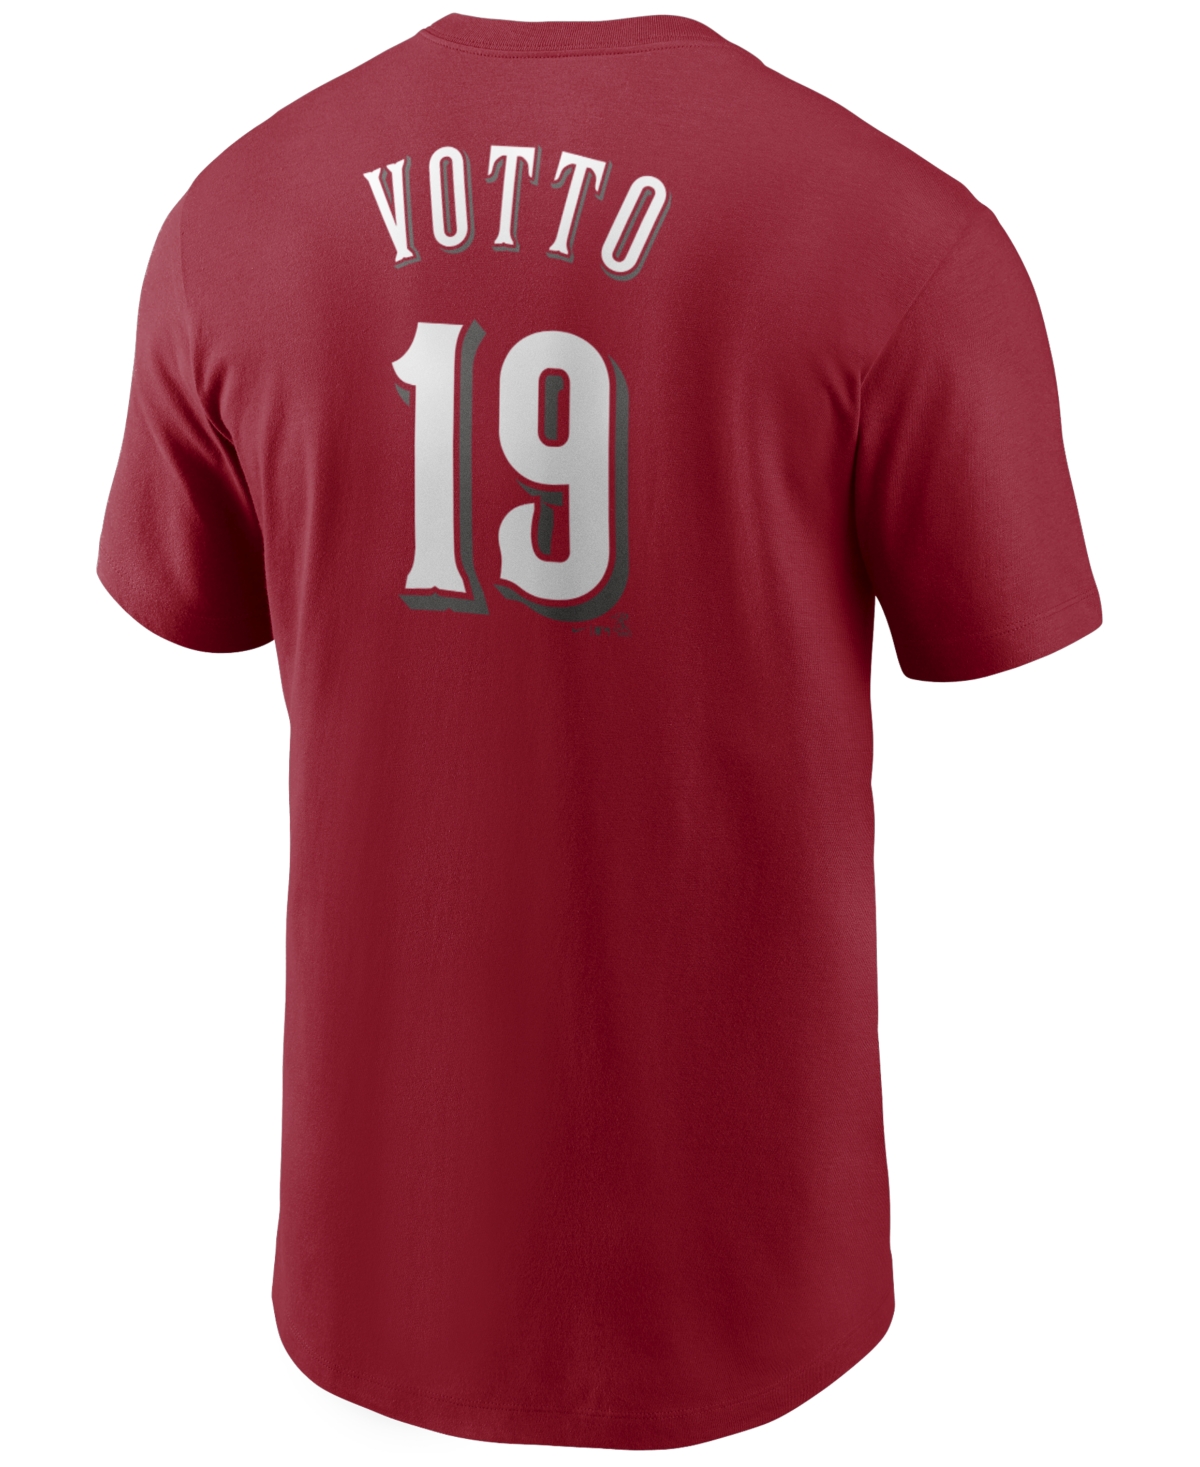 Nike Men's Joey Votto Cincinnati Reds Name and Number Player T-Shirt